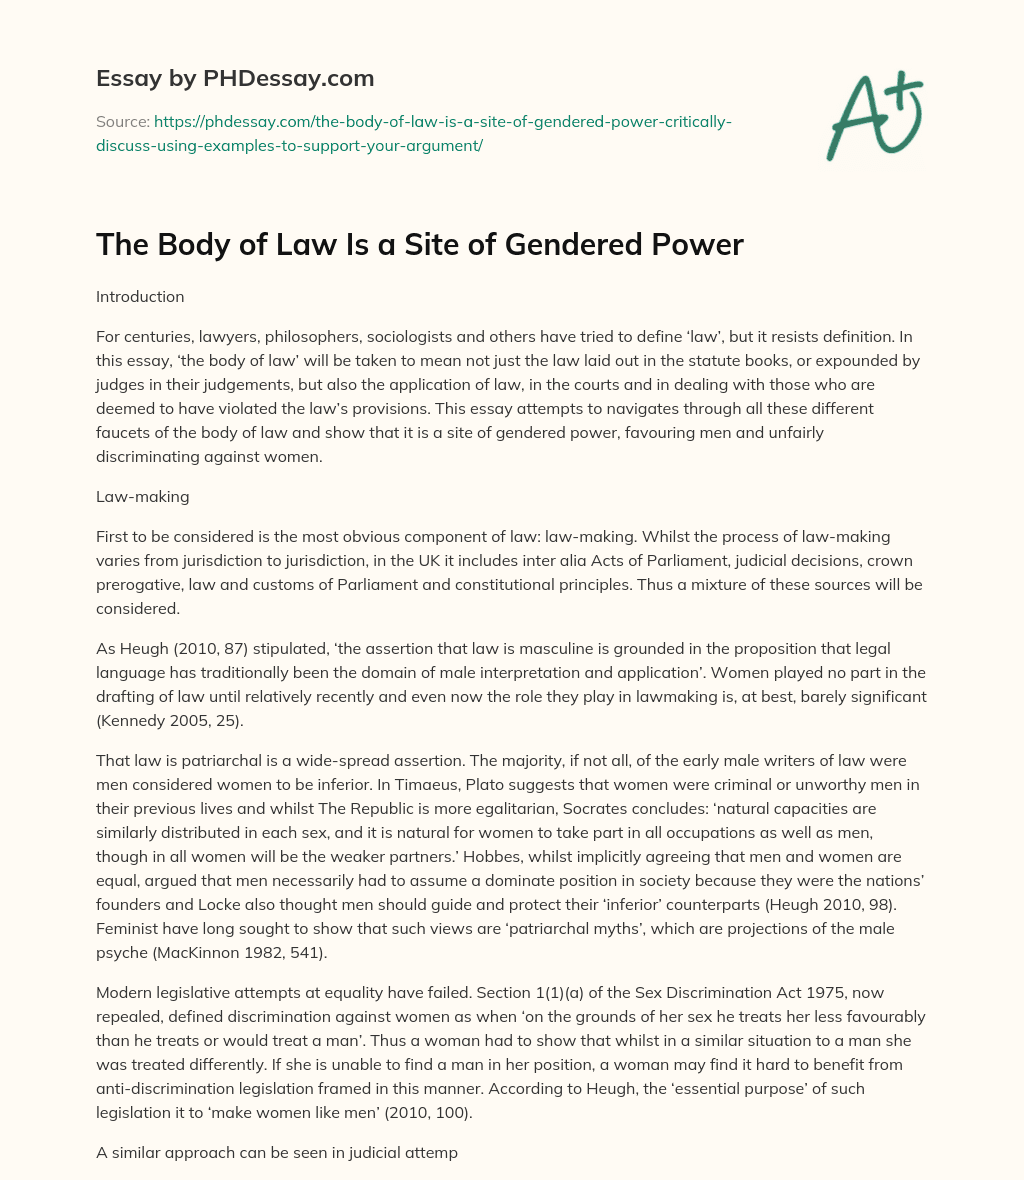 The Body of Law Is a Site of Gendered Power essay